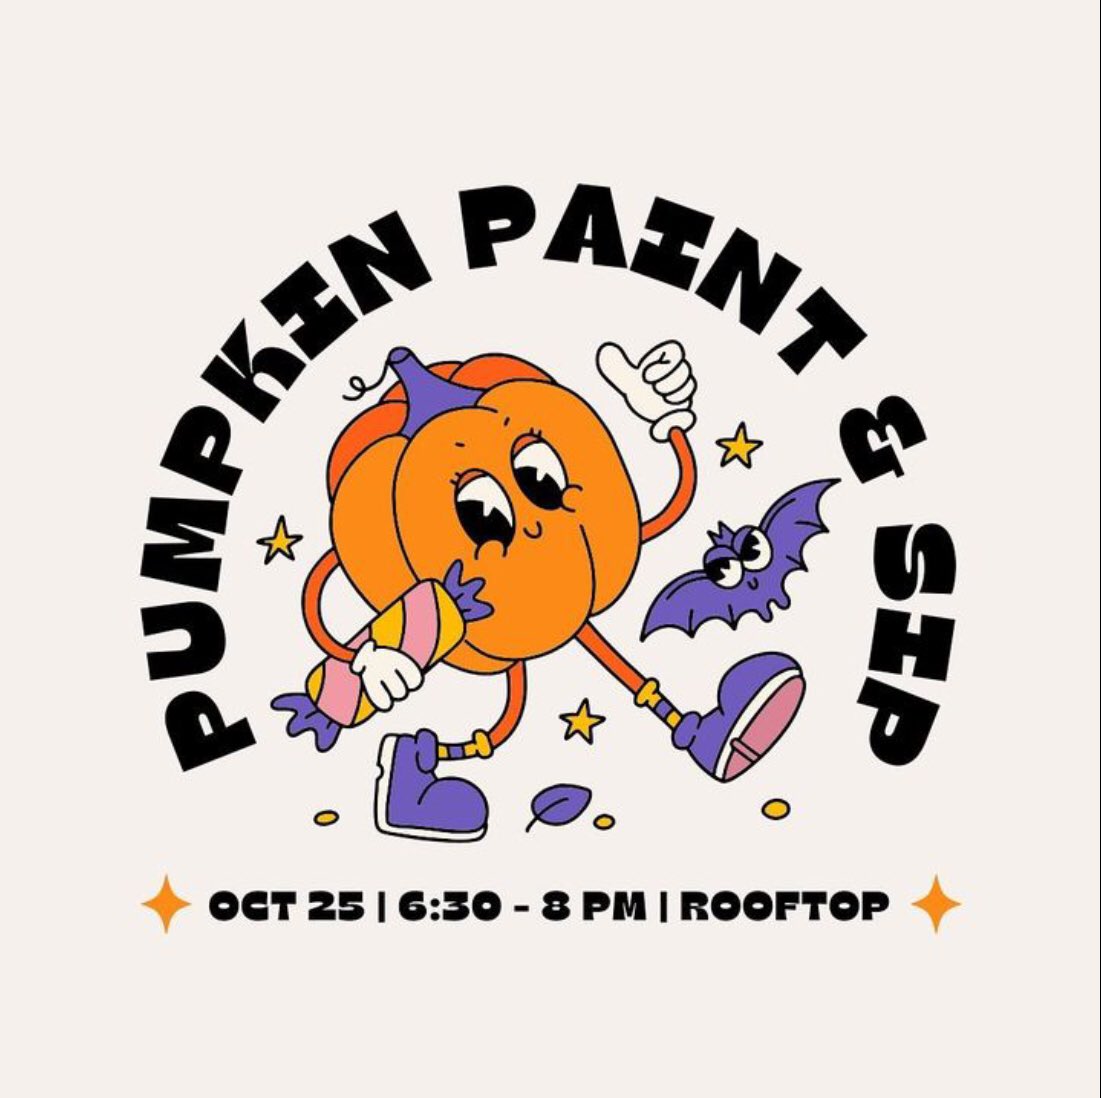 ss our annual Pumpkin 🎃 Paint & Sip in the rooftop lounge tomorrow 10/25 6:30-8pm! 🎨 Grab your friends for painting, drinks & charcuterie 🍷 

#events #pumpkin #paint #lincolnatdilworth #willowbridgepropco #apartmentlife